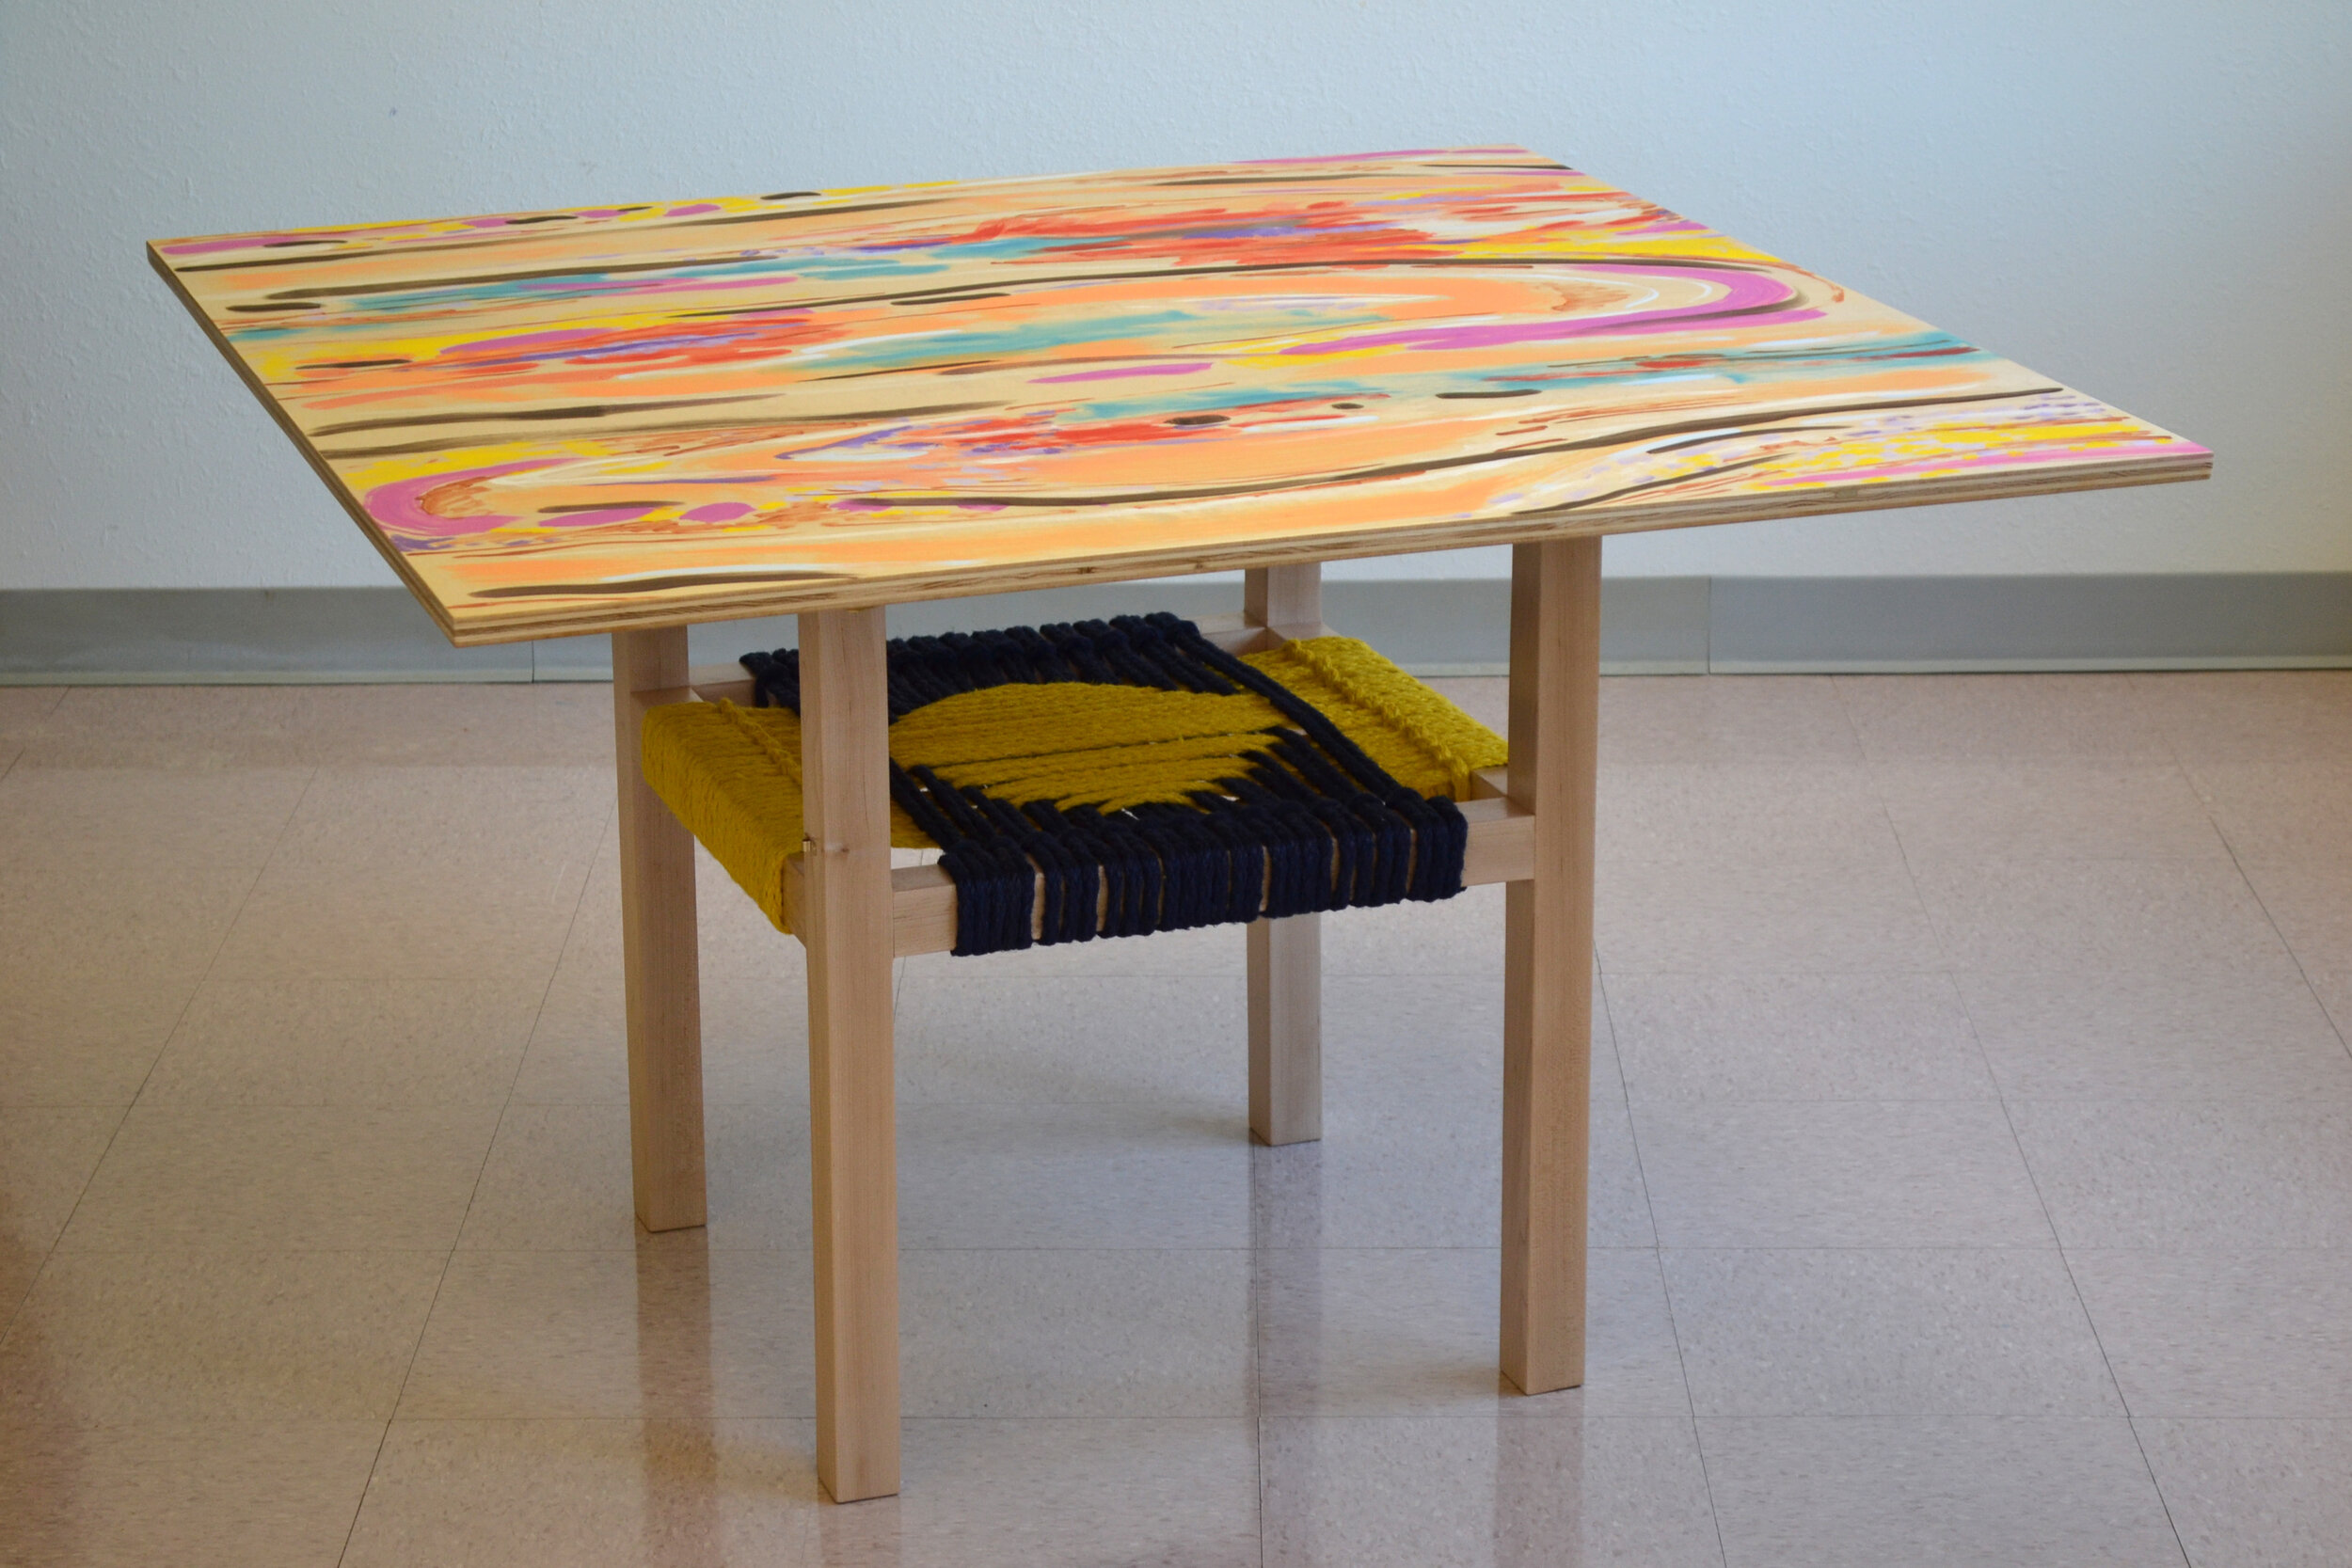 TableChairPainting, 2012